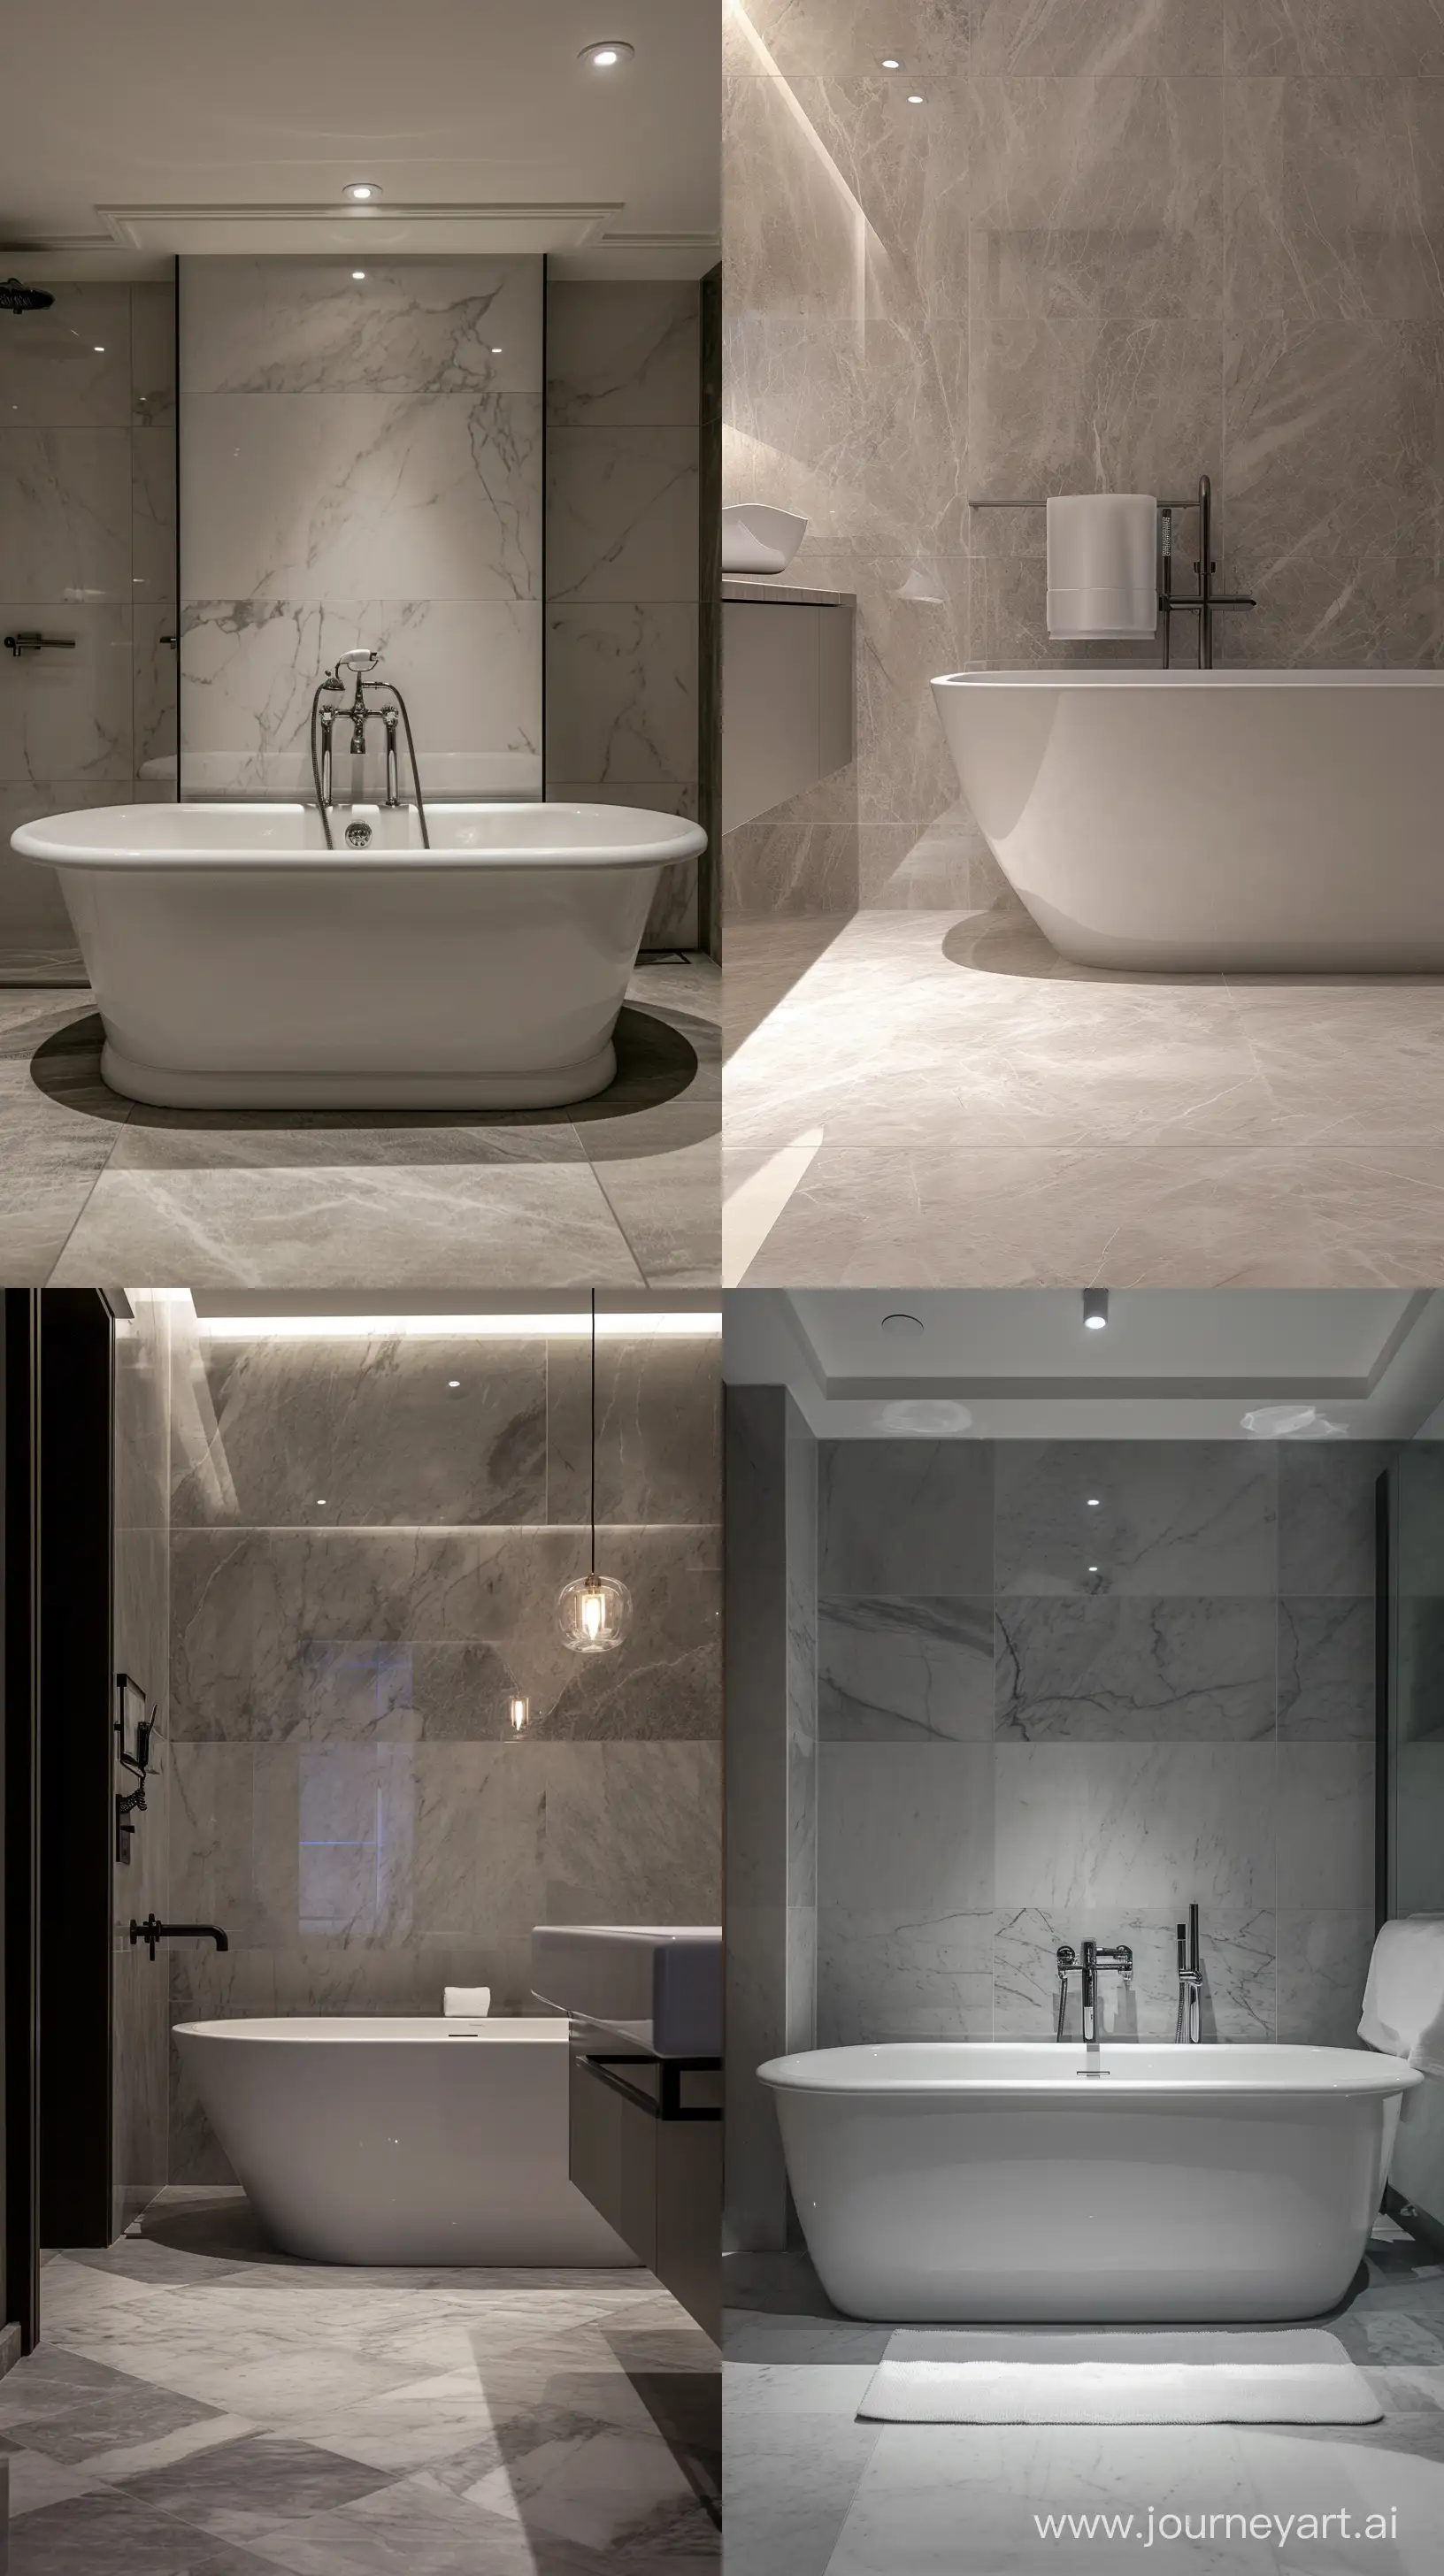 Luxurious-Modern-Chic-Bathroom-with-Marble-Tiling-and-Freestanding-Tub